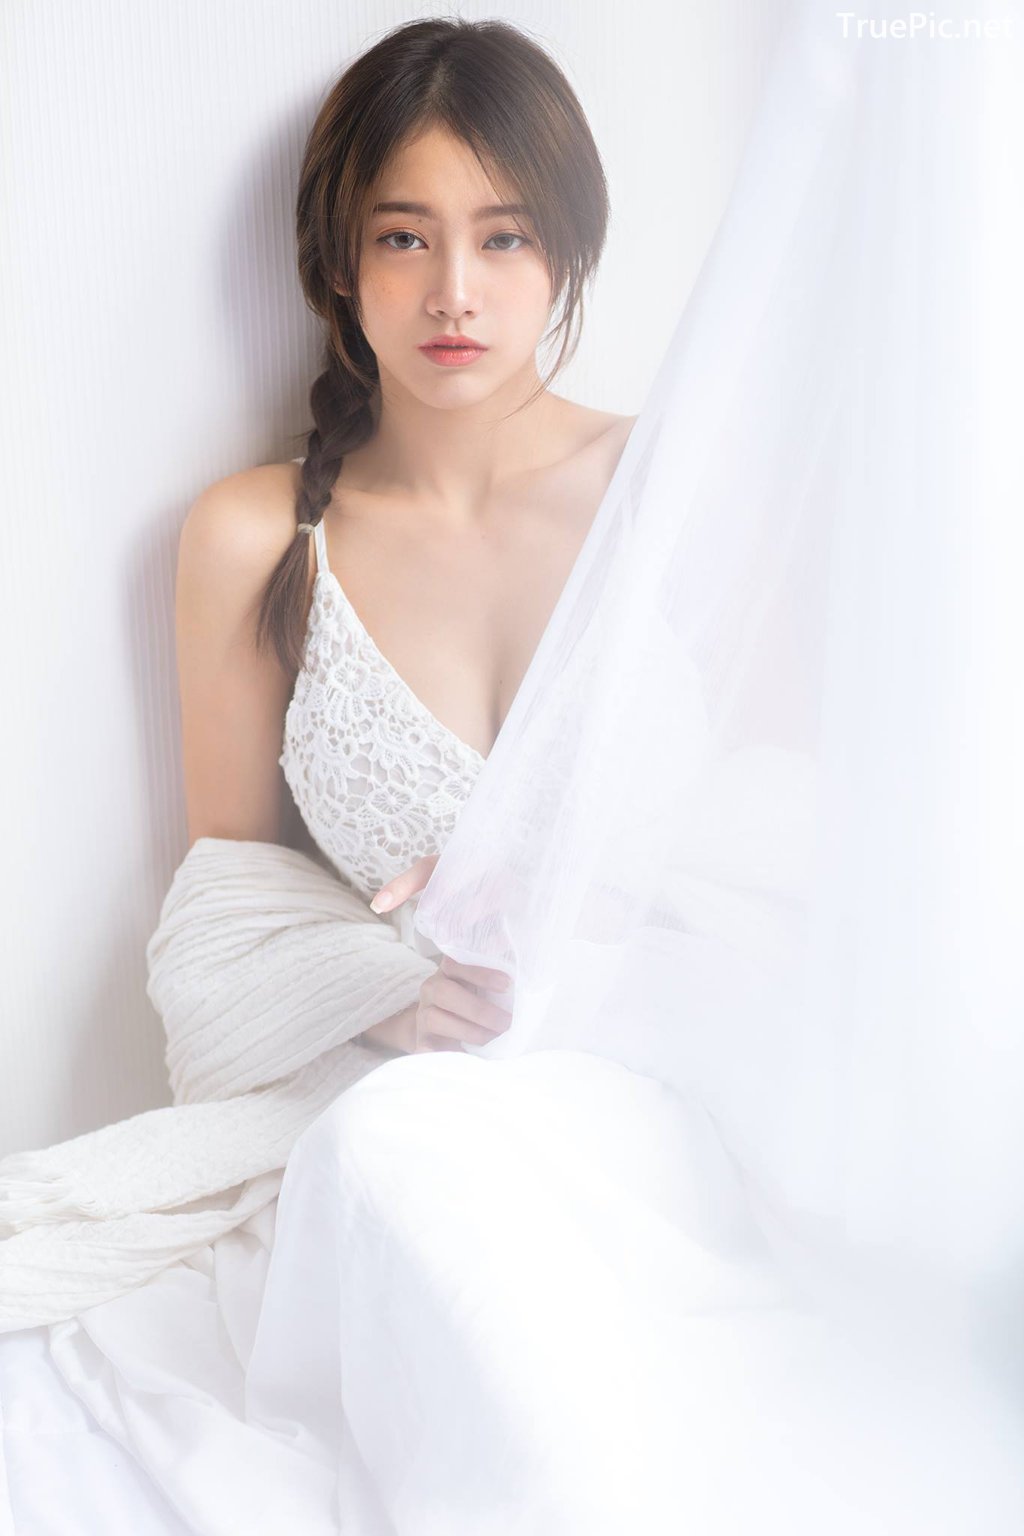 Image Thailand Model - Pimploy Chitranapawong - Beautiful In White - TruePic.net - Picture-31